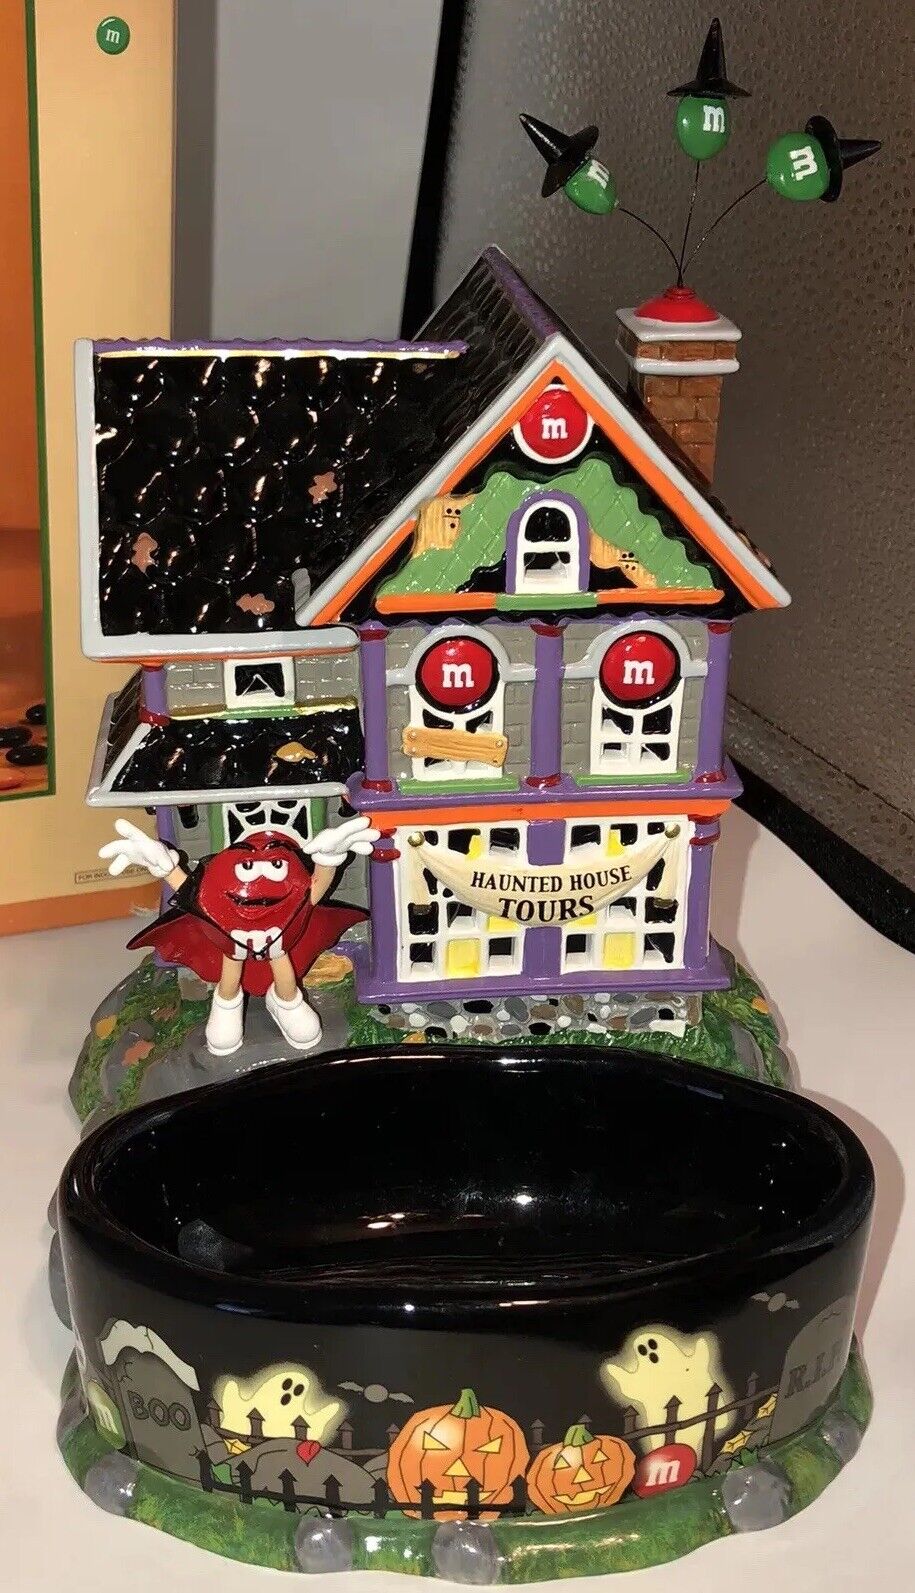 DEPT 56 M&M'S HAUNTED HOUSE TOURS LIGHTED HOUSE & CANDY DISH HALLOWEEN Fun